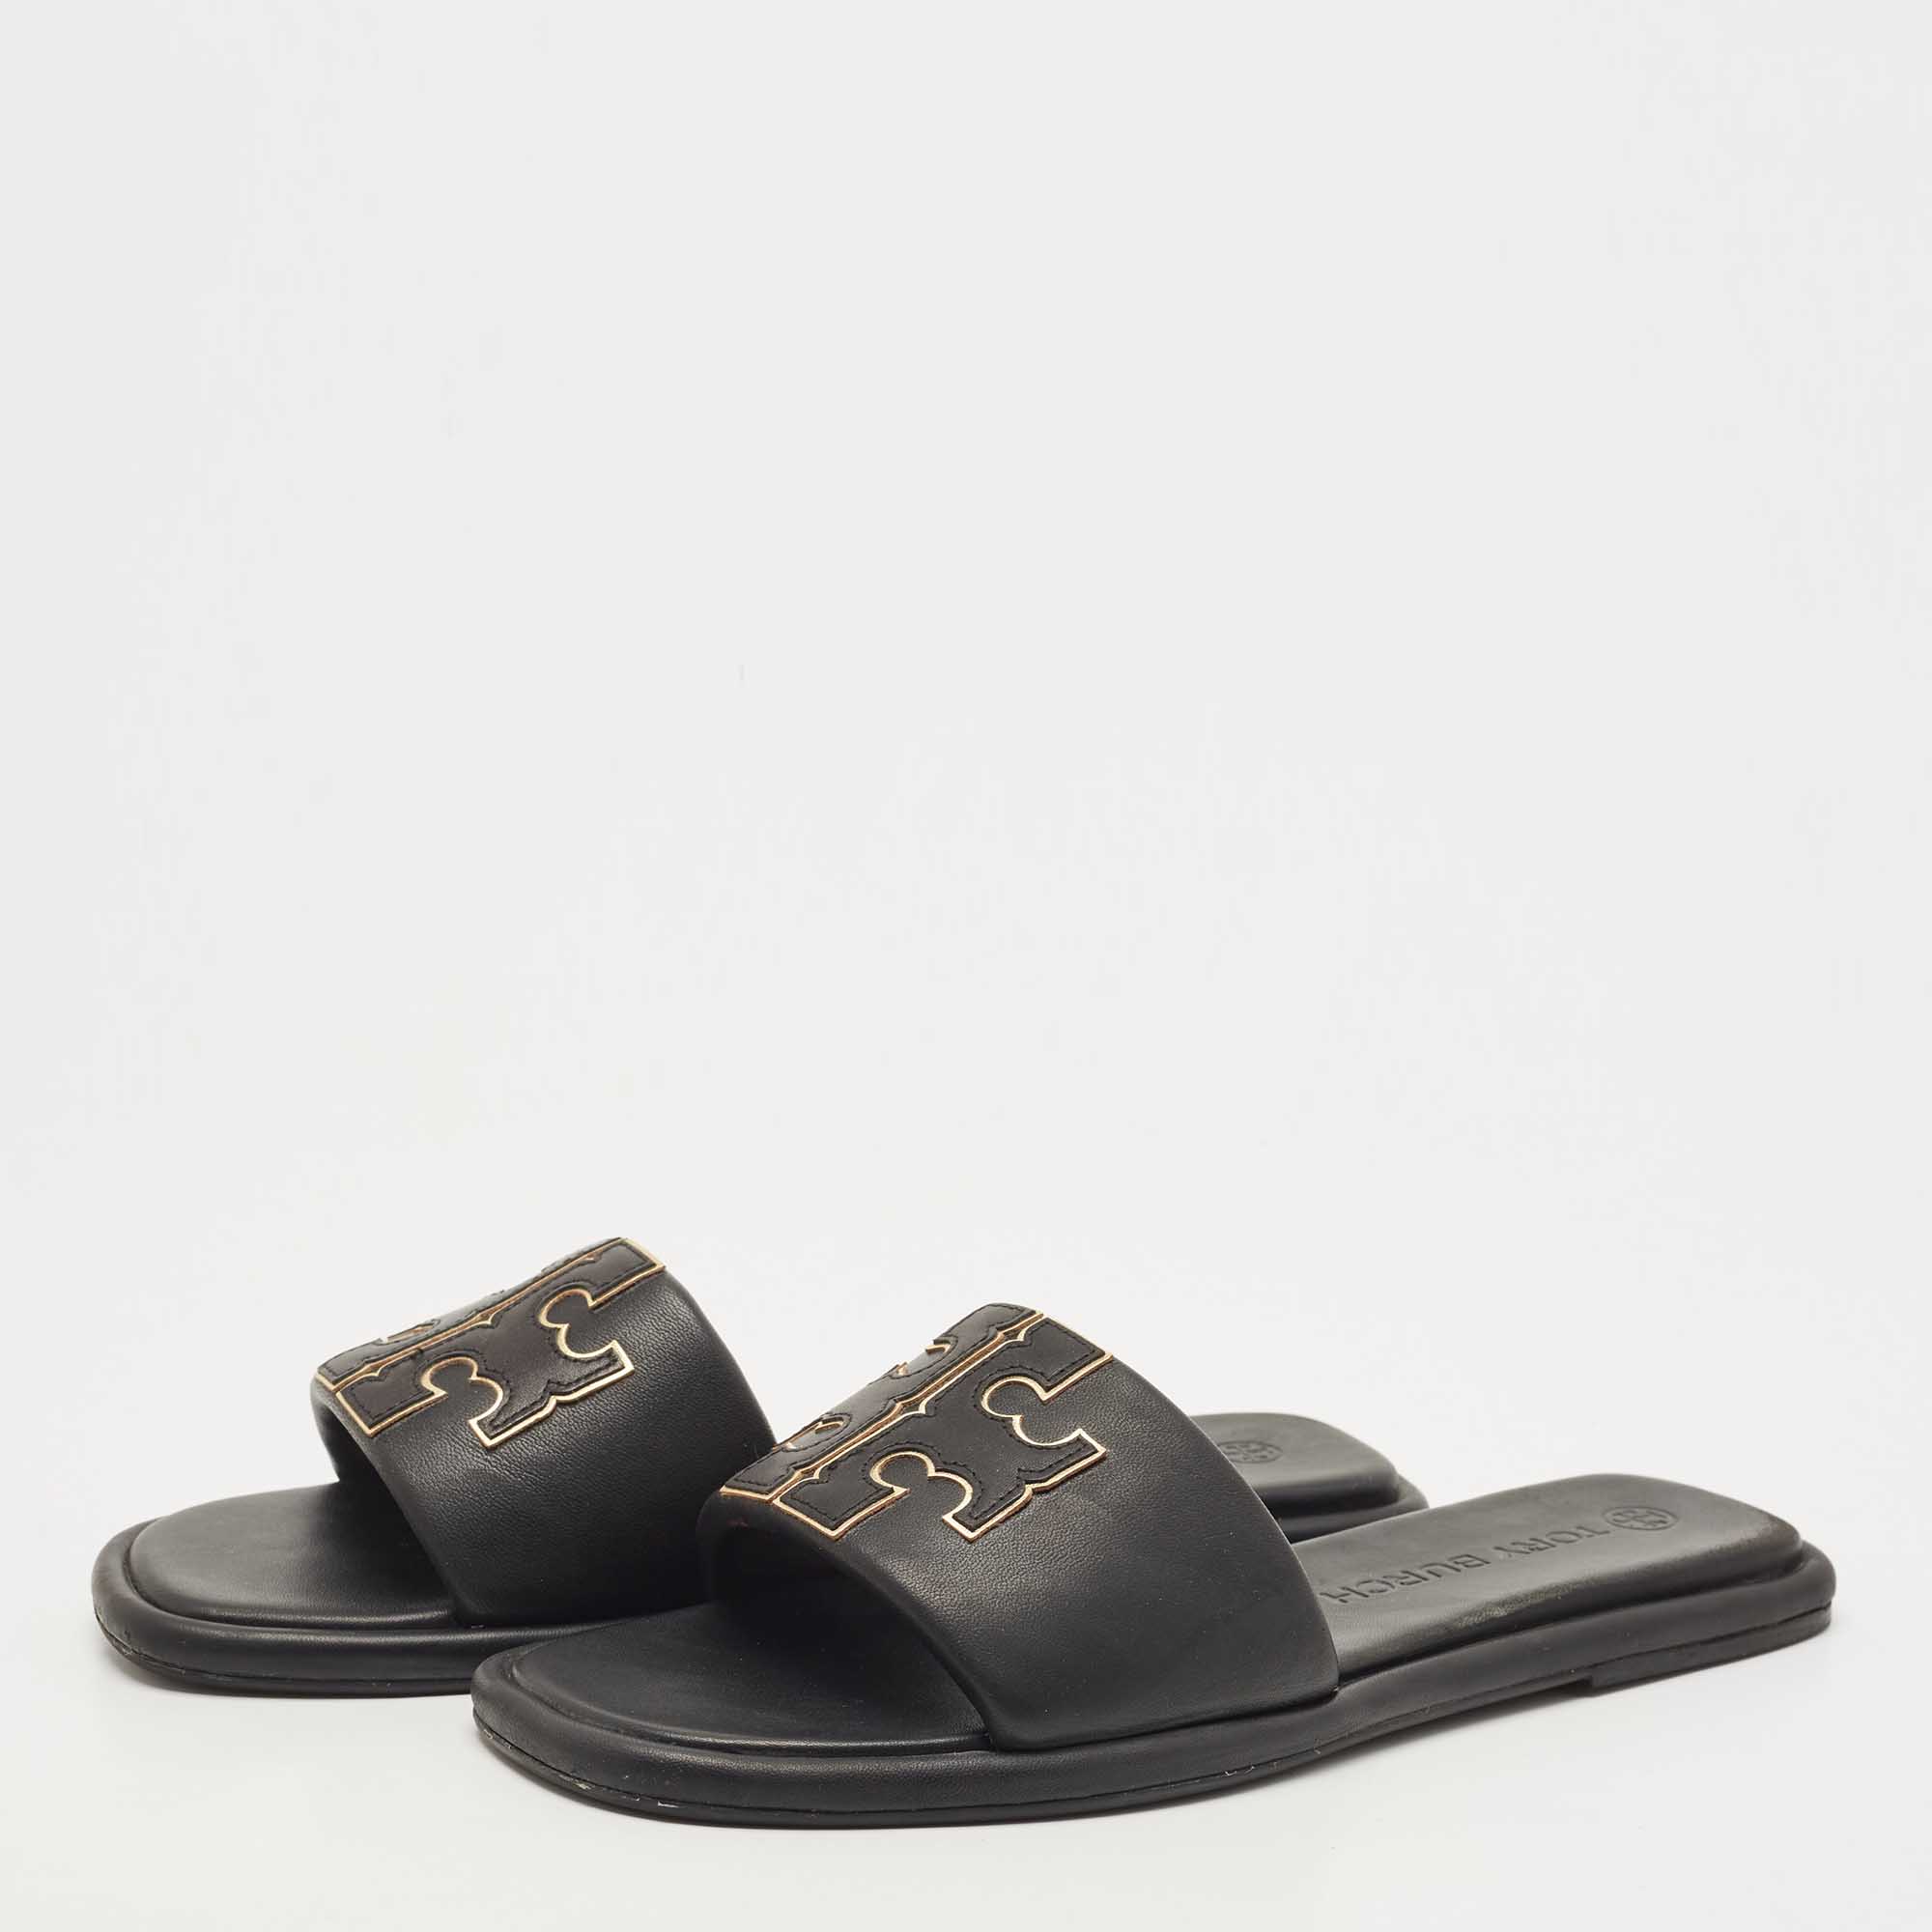 

Tory Burch Black Leather Double T Flat Slides Size